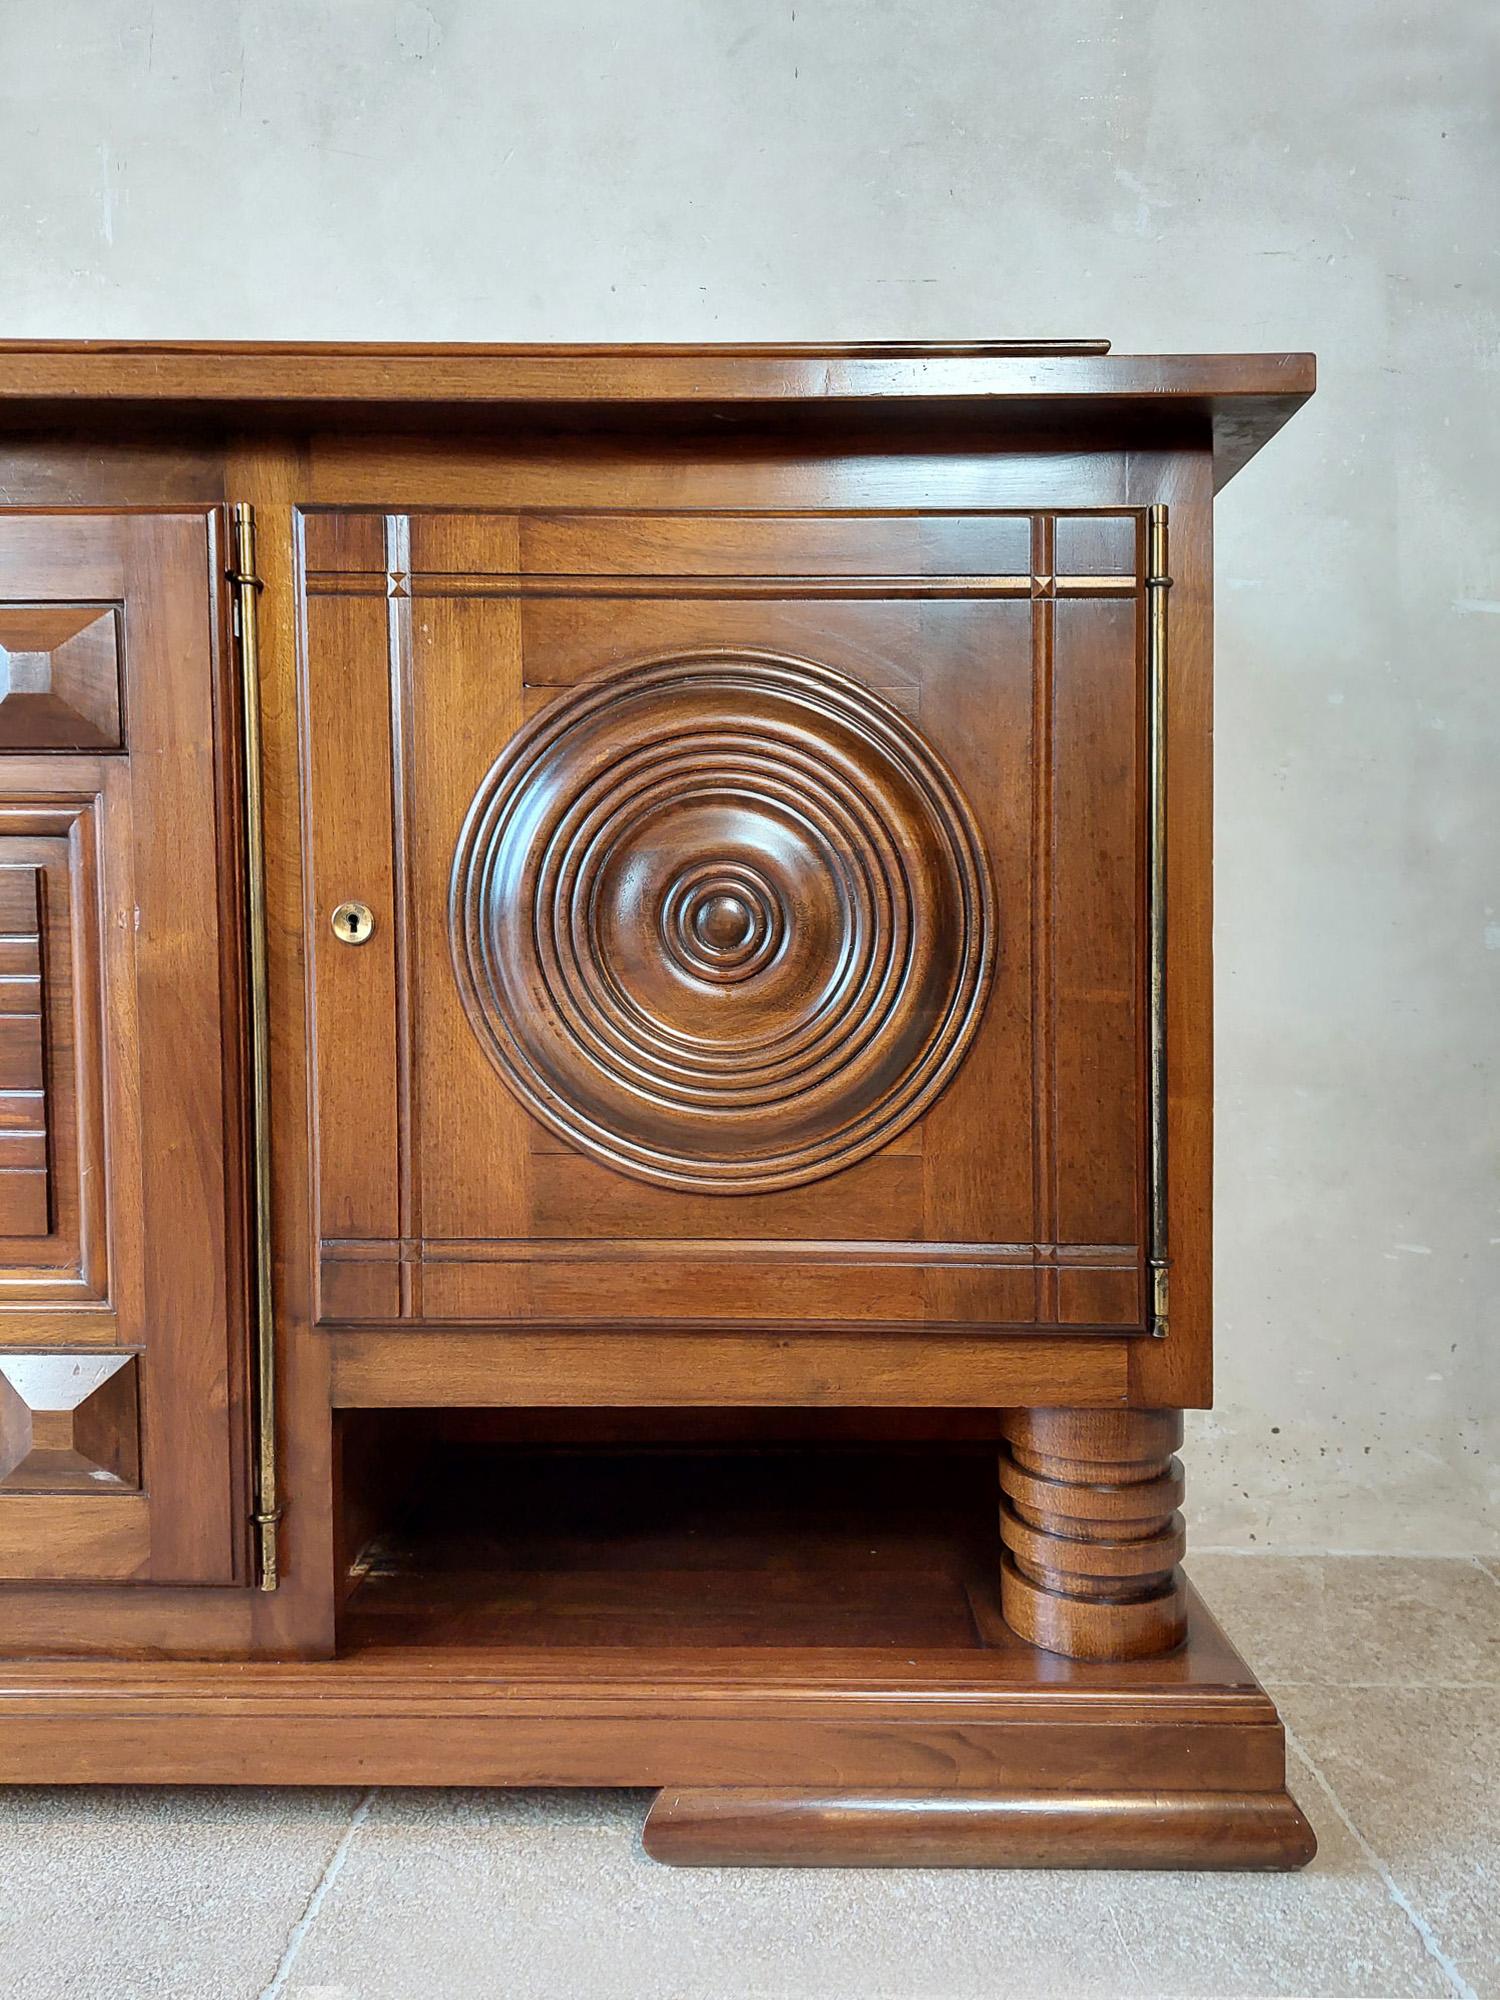 Mid-20th Century Walnut Sideboard by Charles Dudouyt in Brown with a Polished Finish, 1940s For Sale